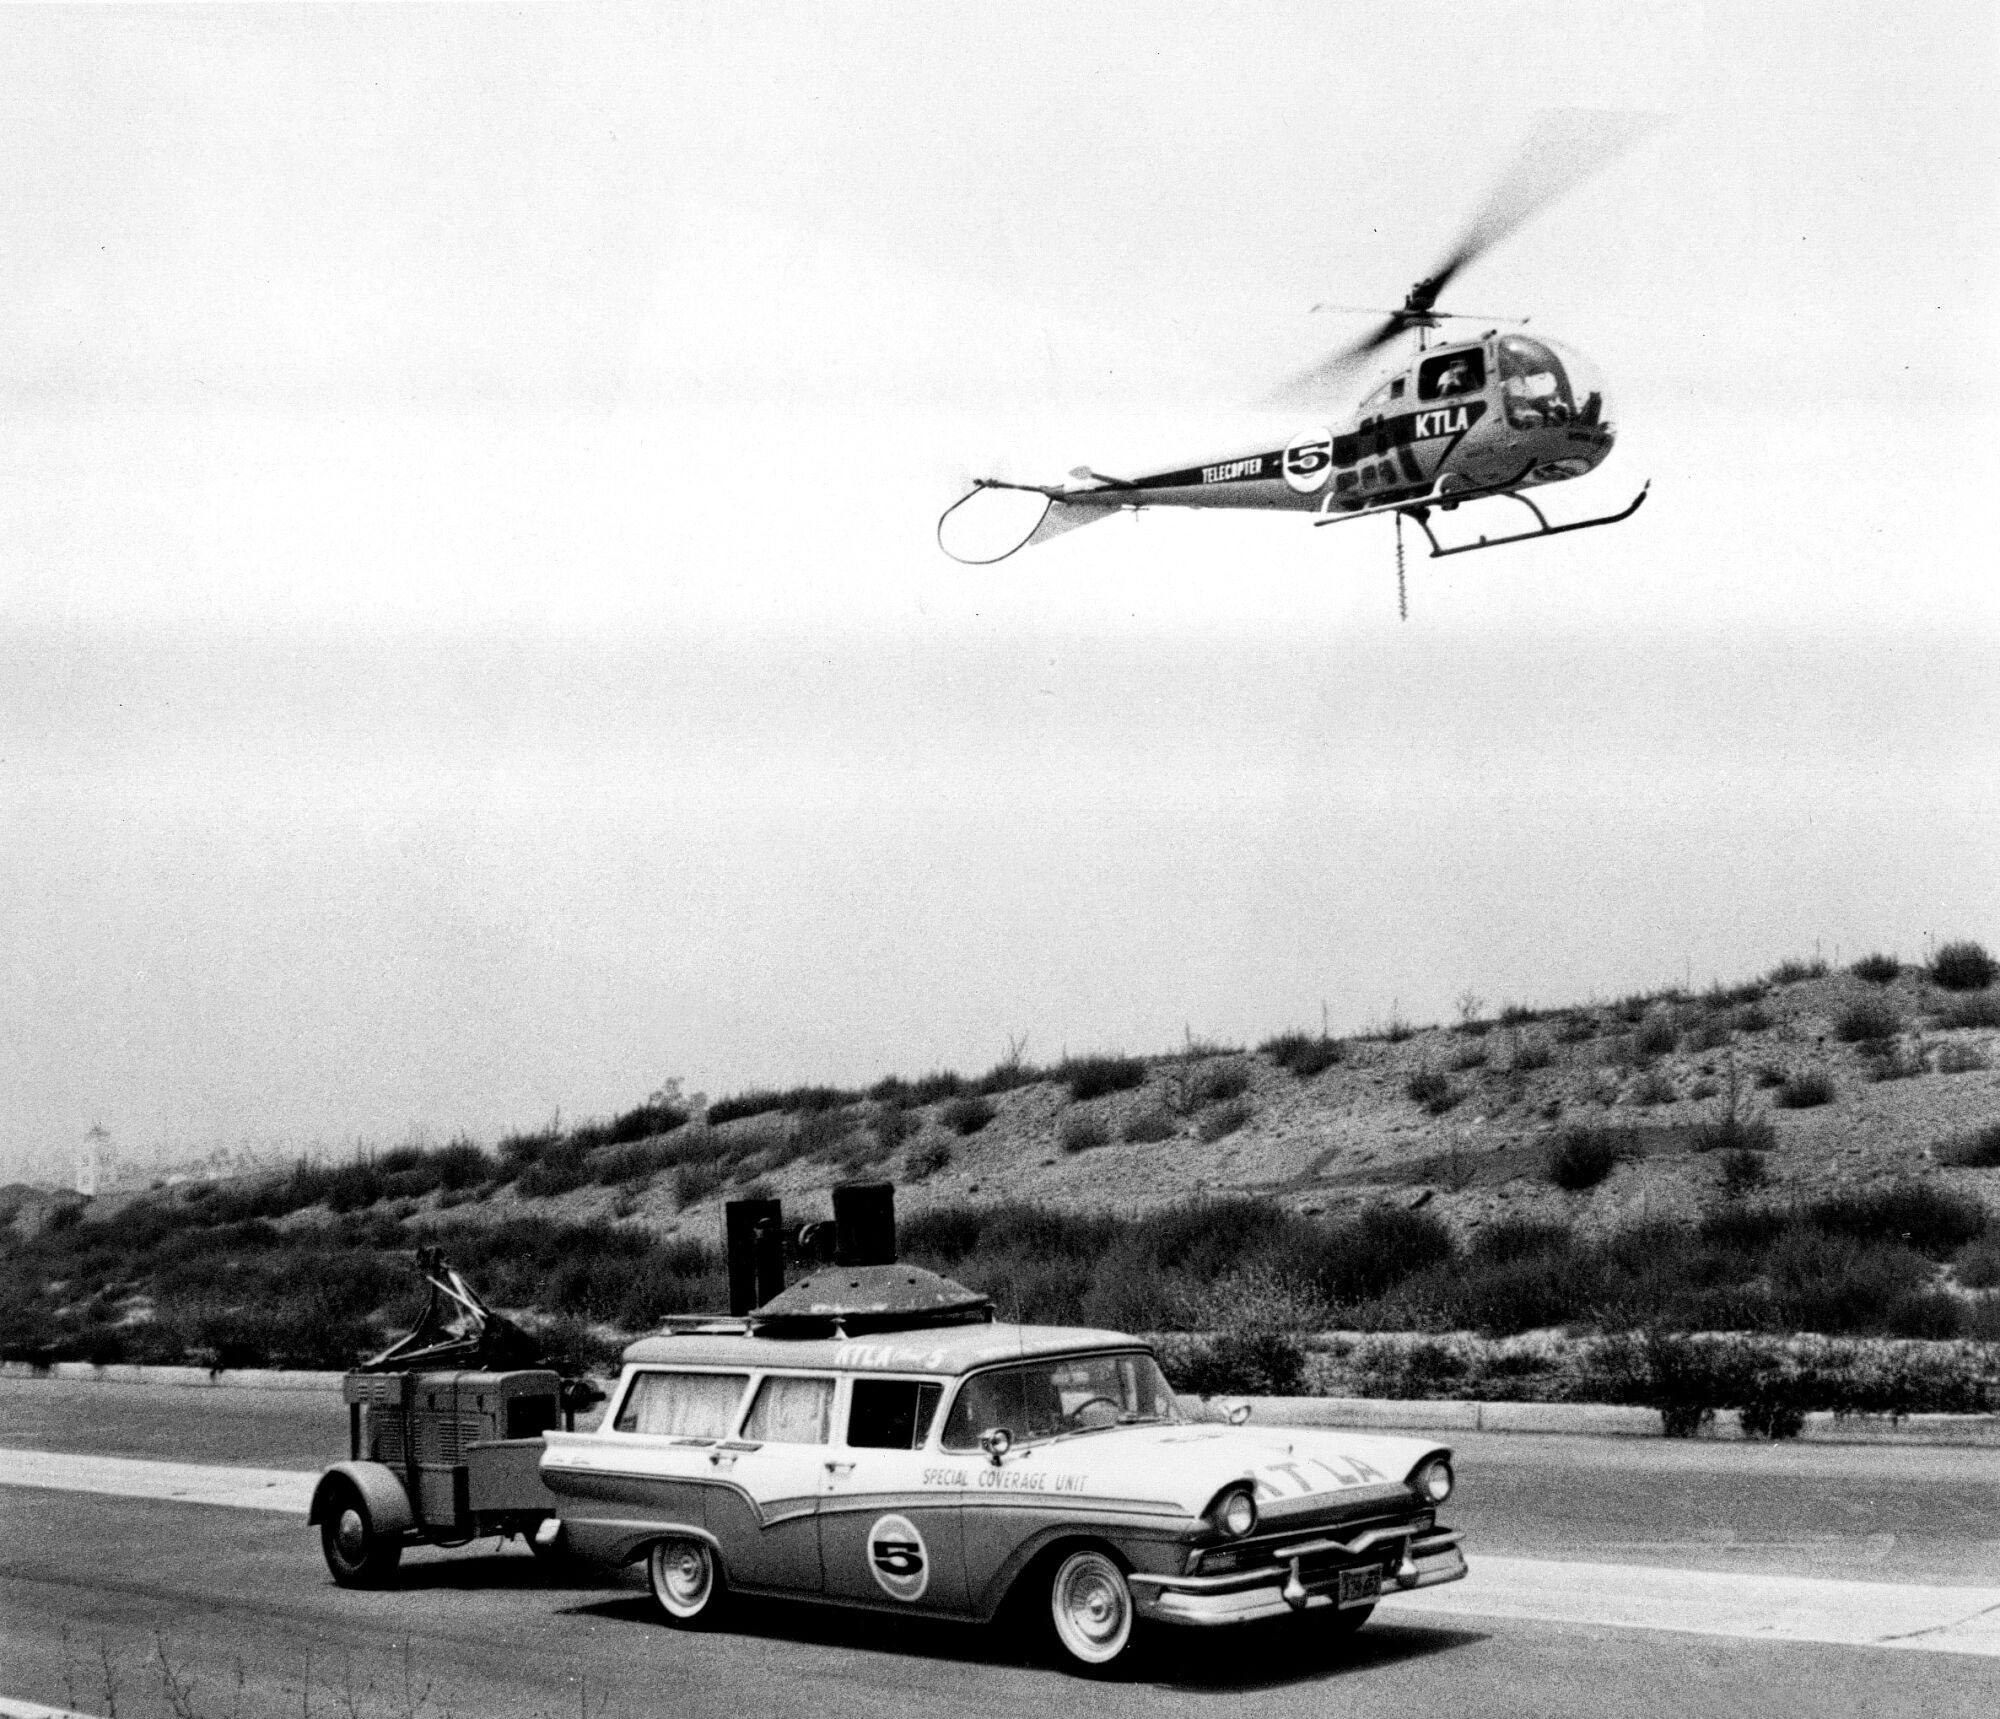 KTLA in 1958 became the first station to use a helicopter, dubbed a "telecopter," for newsgathering and broadcasts.